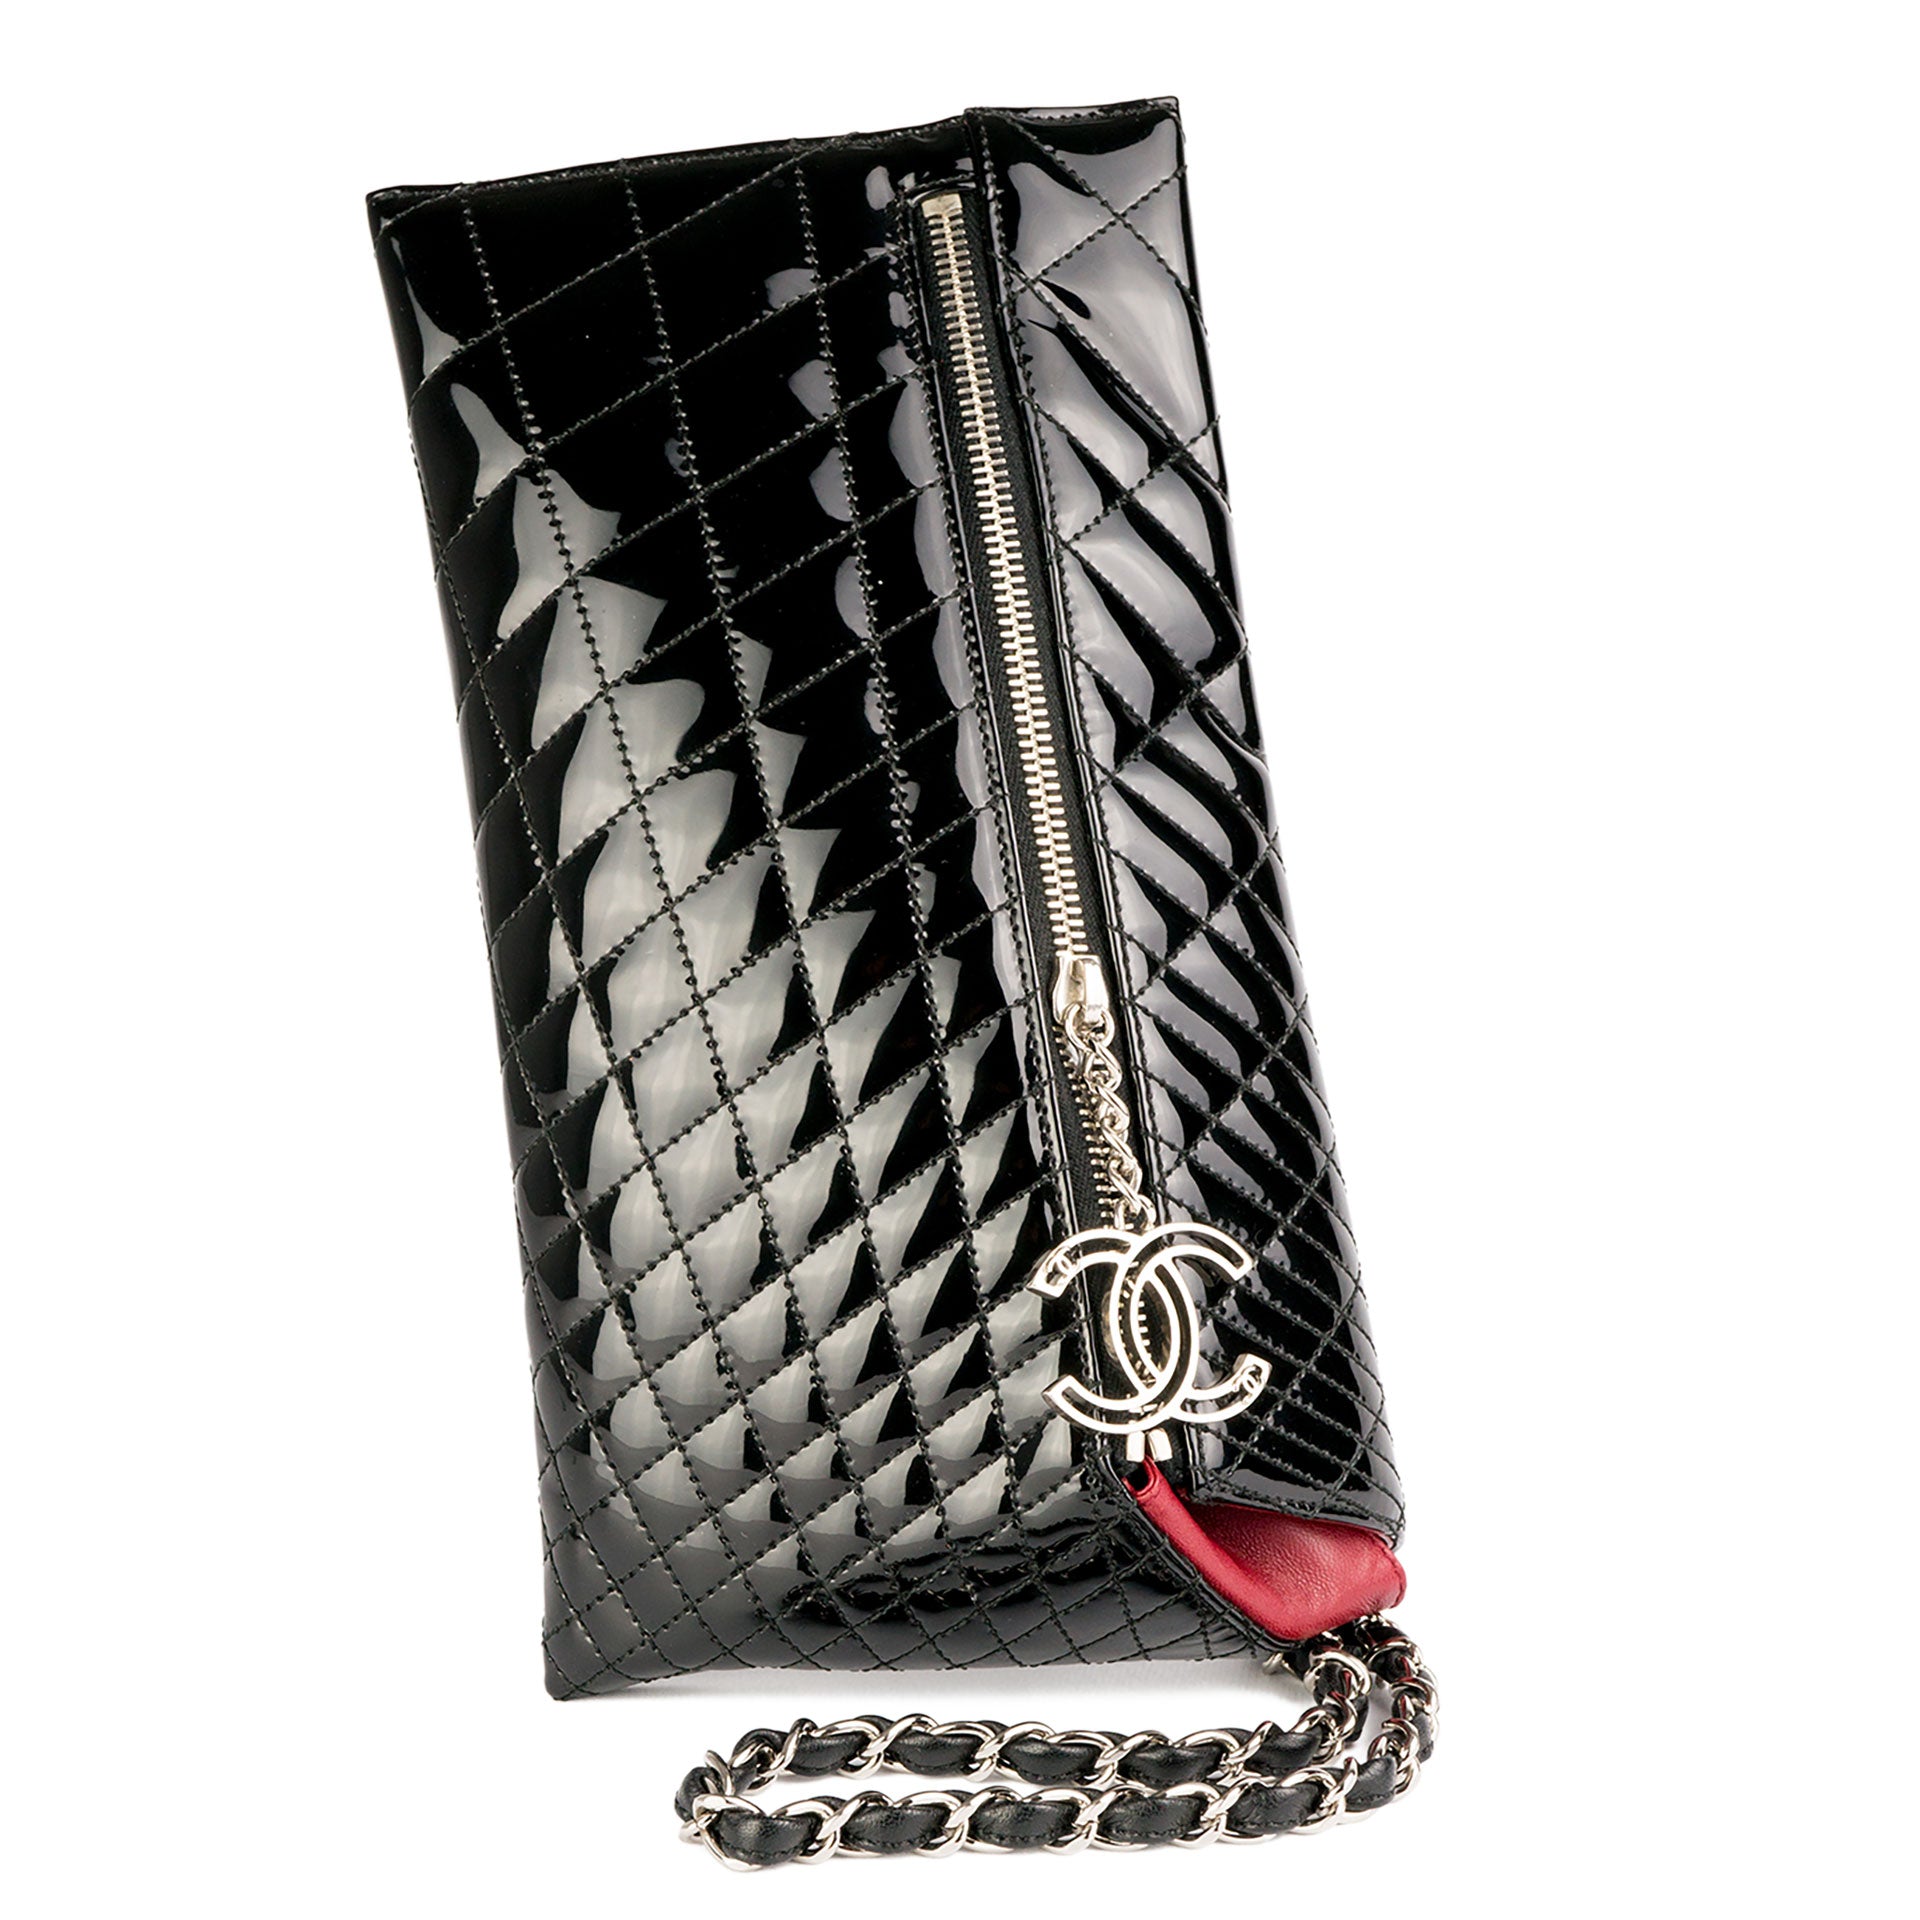 Chanel Clutch With Bag Charms On Chain